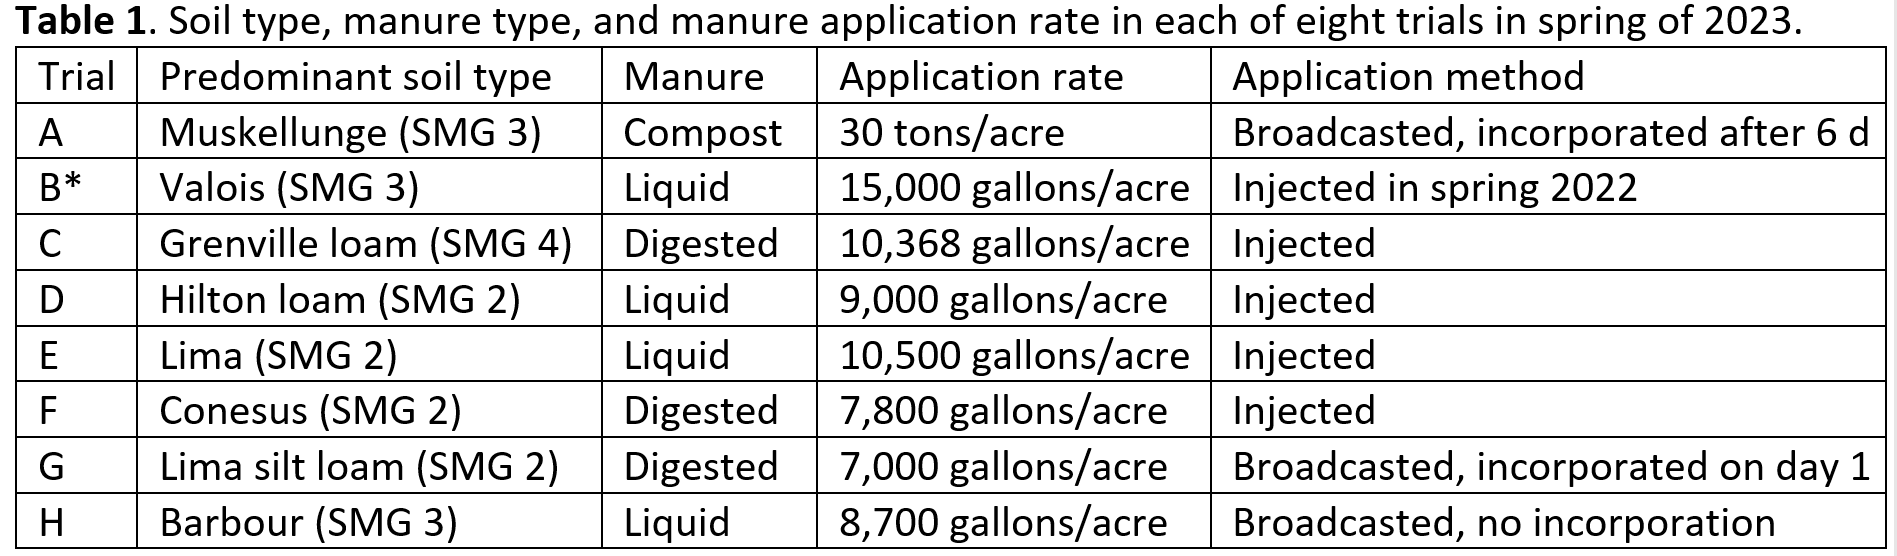 Table describing the soil type, manure type, and manure application rate of the different trials in spring of 2023.